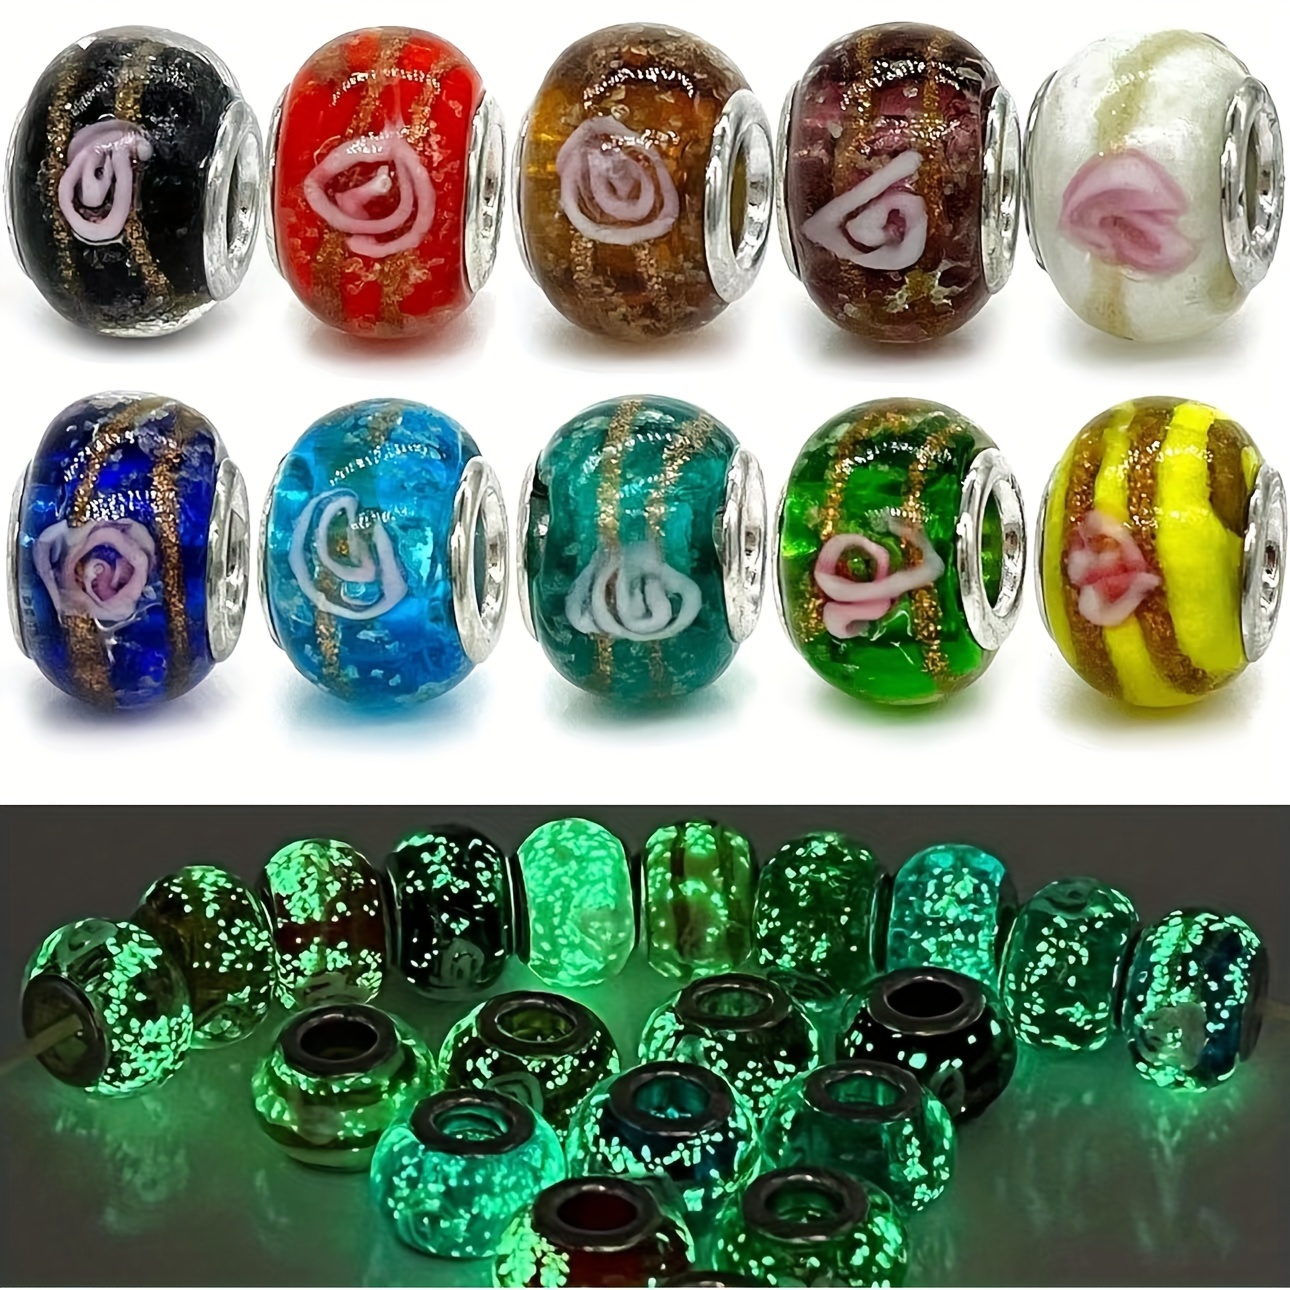 

10pcs Glow-in-the-dark Firefly Glass Beads 14mm - Large Hole, Perfect For Diy Jewelry Making